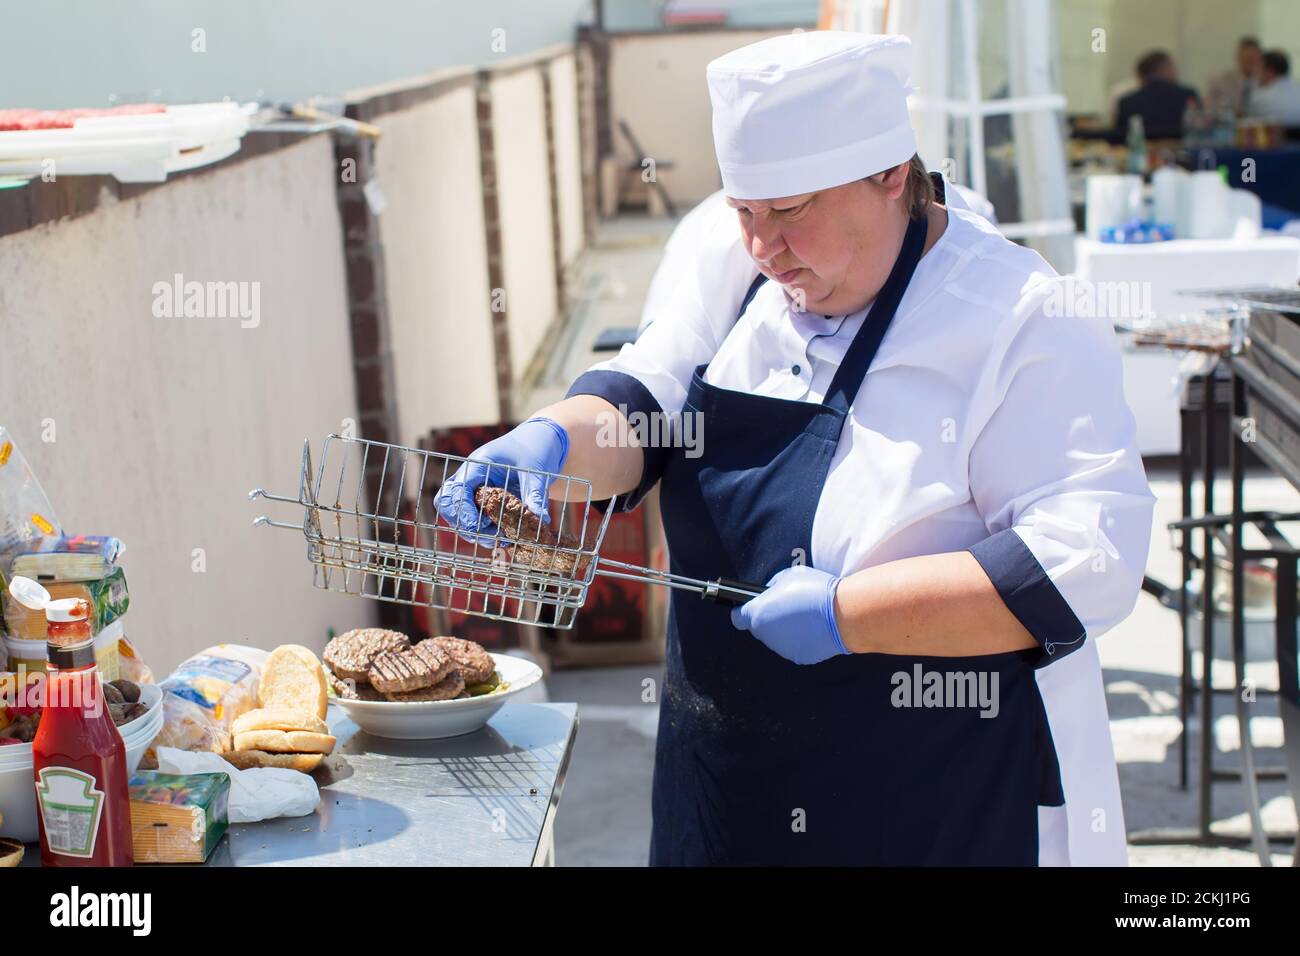 Belarus, Gomel district on July 17, 2020. The streets of the city. Woman cook on the street prepares a hamburger. Stock Photo